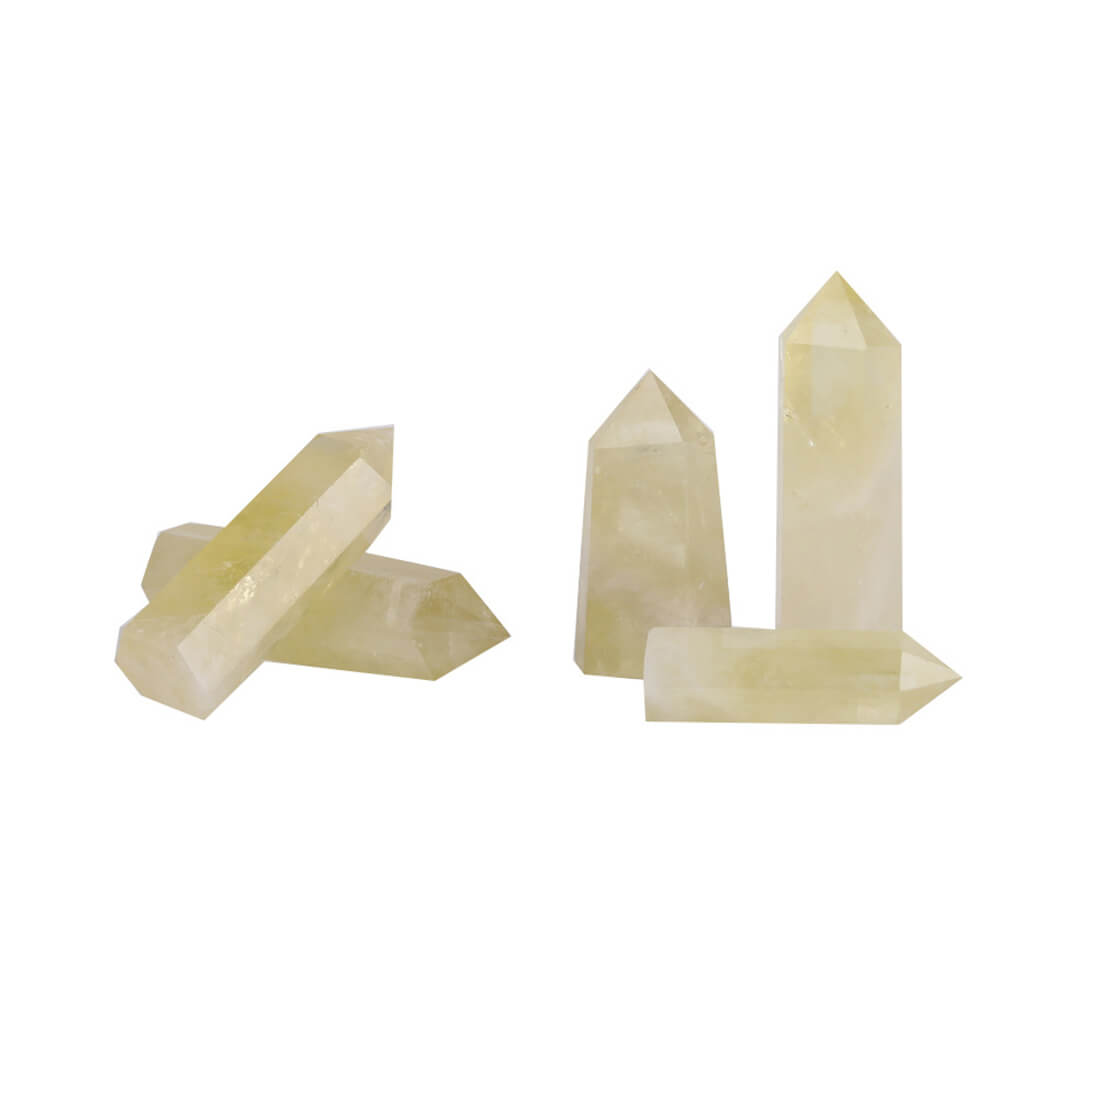 Citrine Crystal Towers - 5 to 9 cm